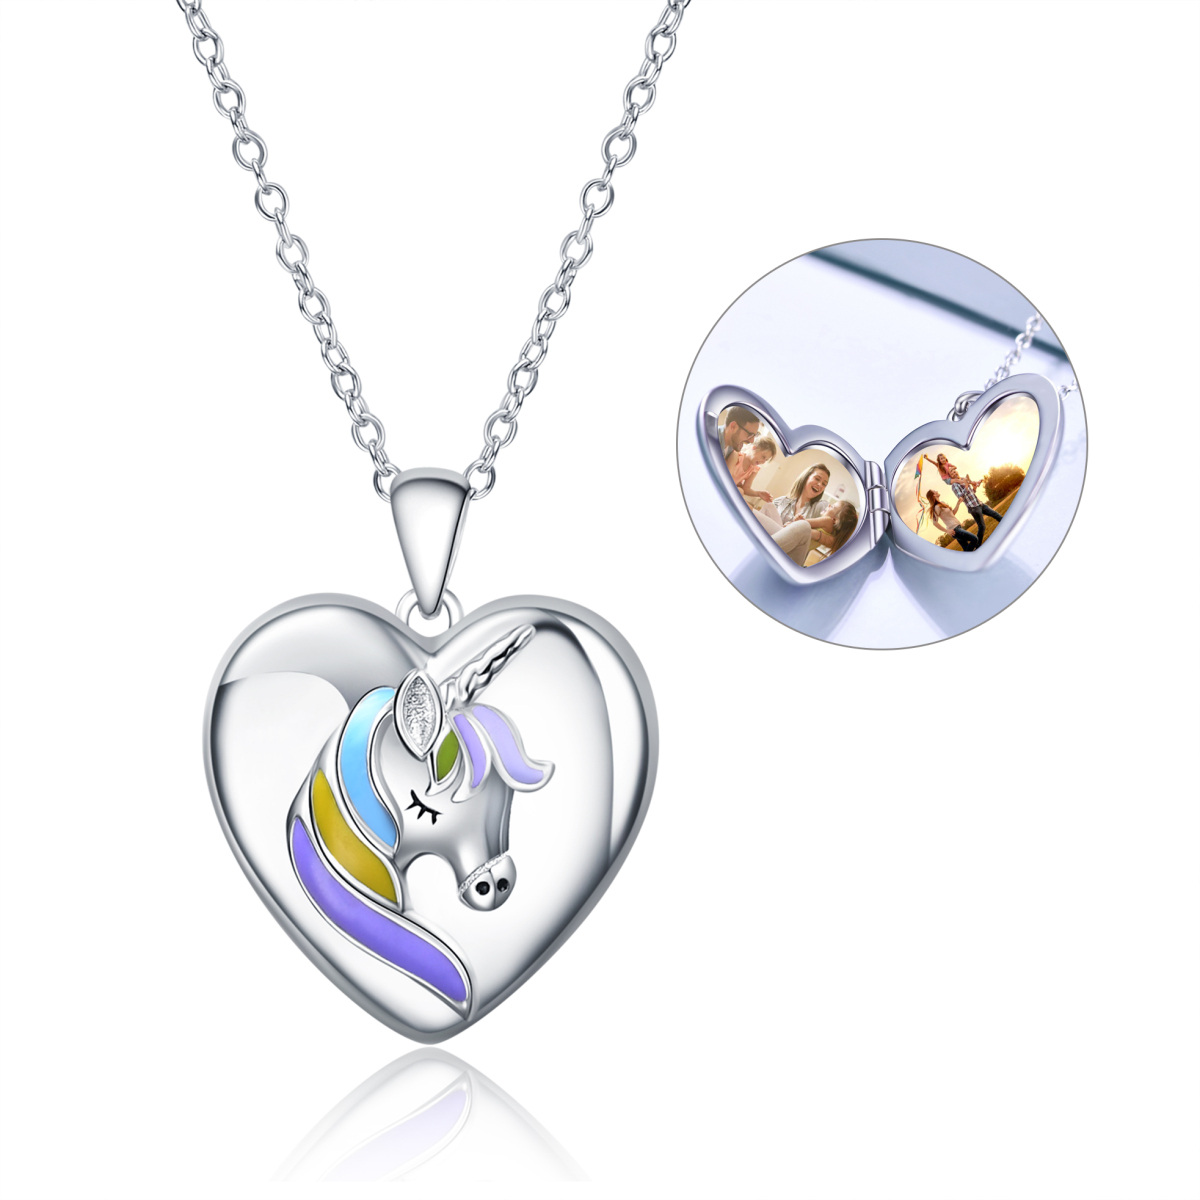 Sterling Silver Unicorn Heart Personalized Photo Locket Necklace with Engraved Word-1